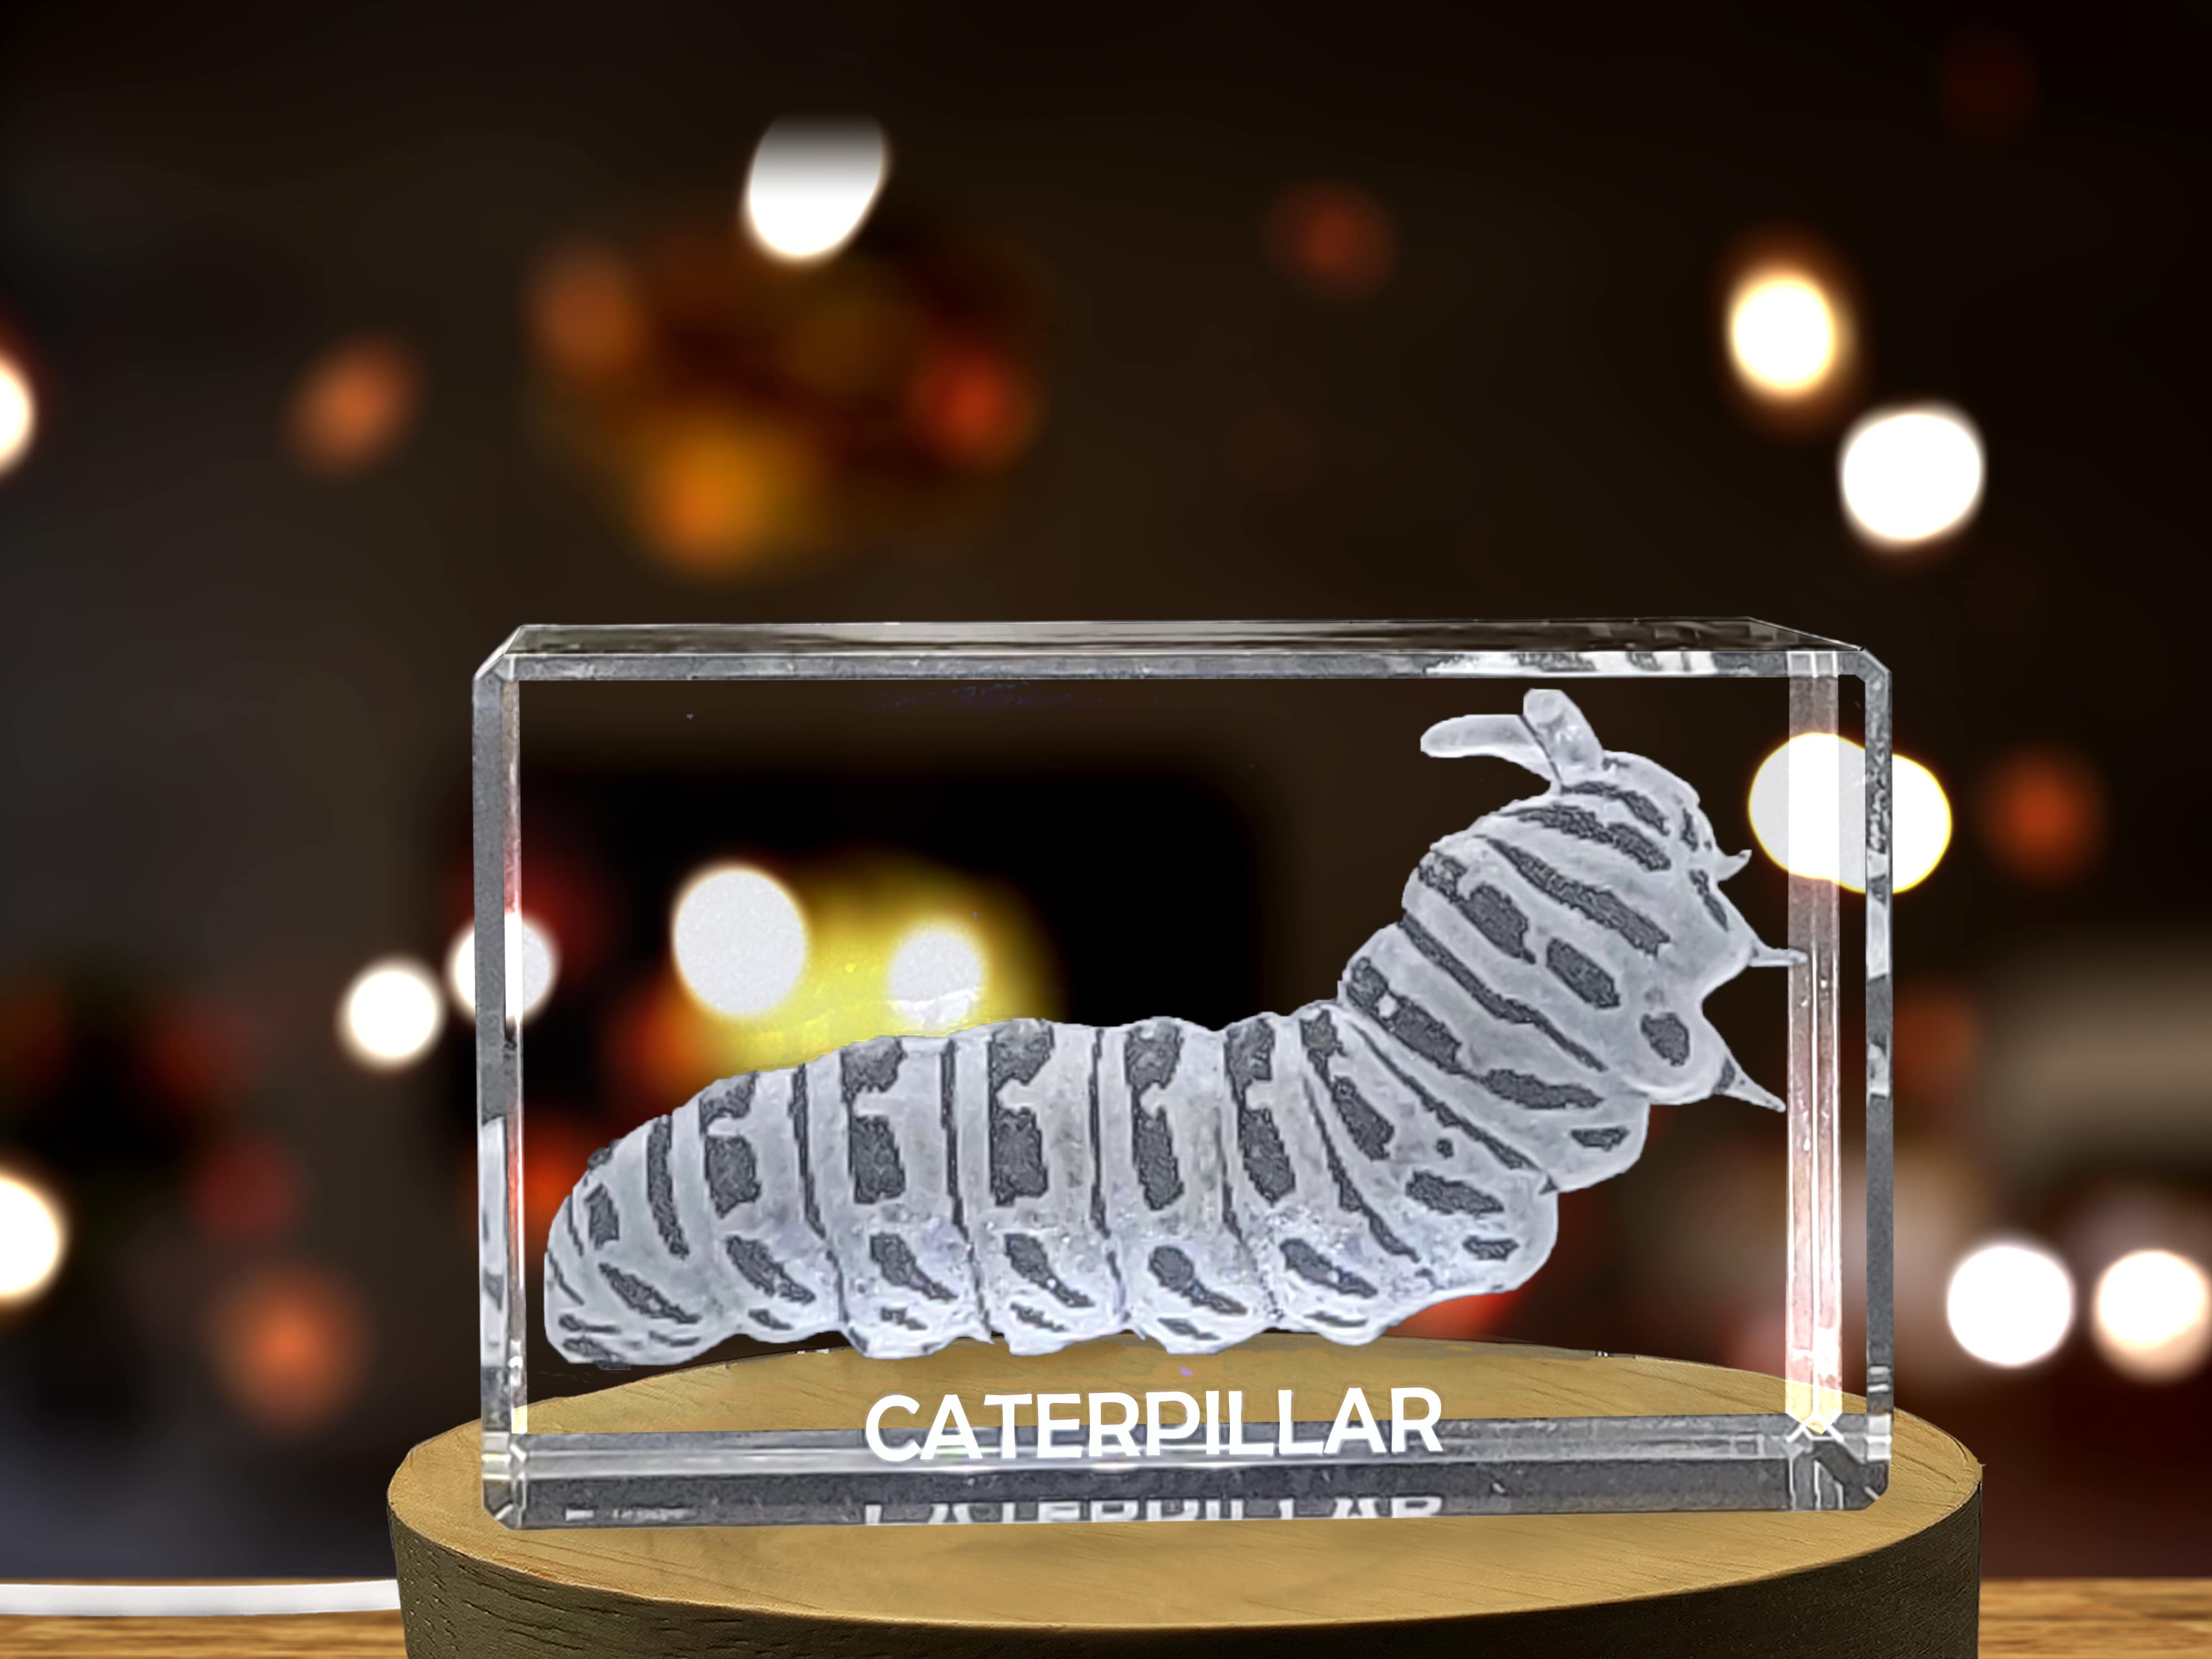 Unique 3D Engraved Crystal with Caterpillar Design - Perfect Gift for Nature Lovers A&B Crystal Collection